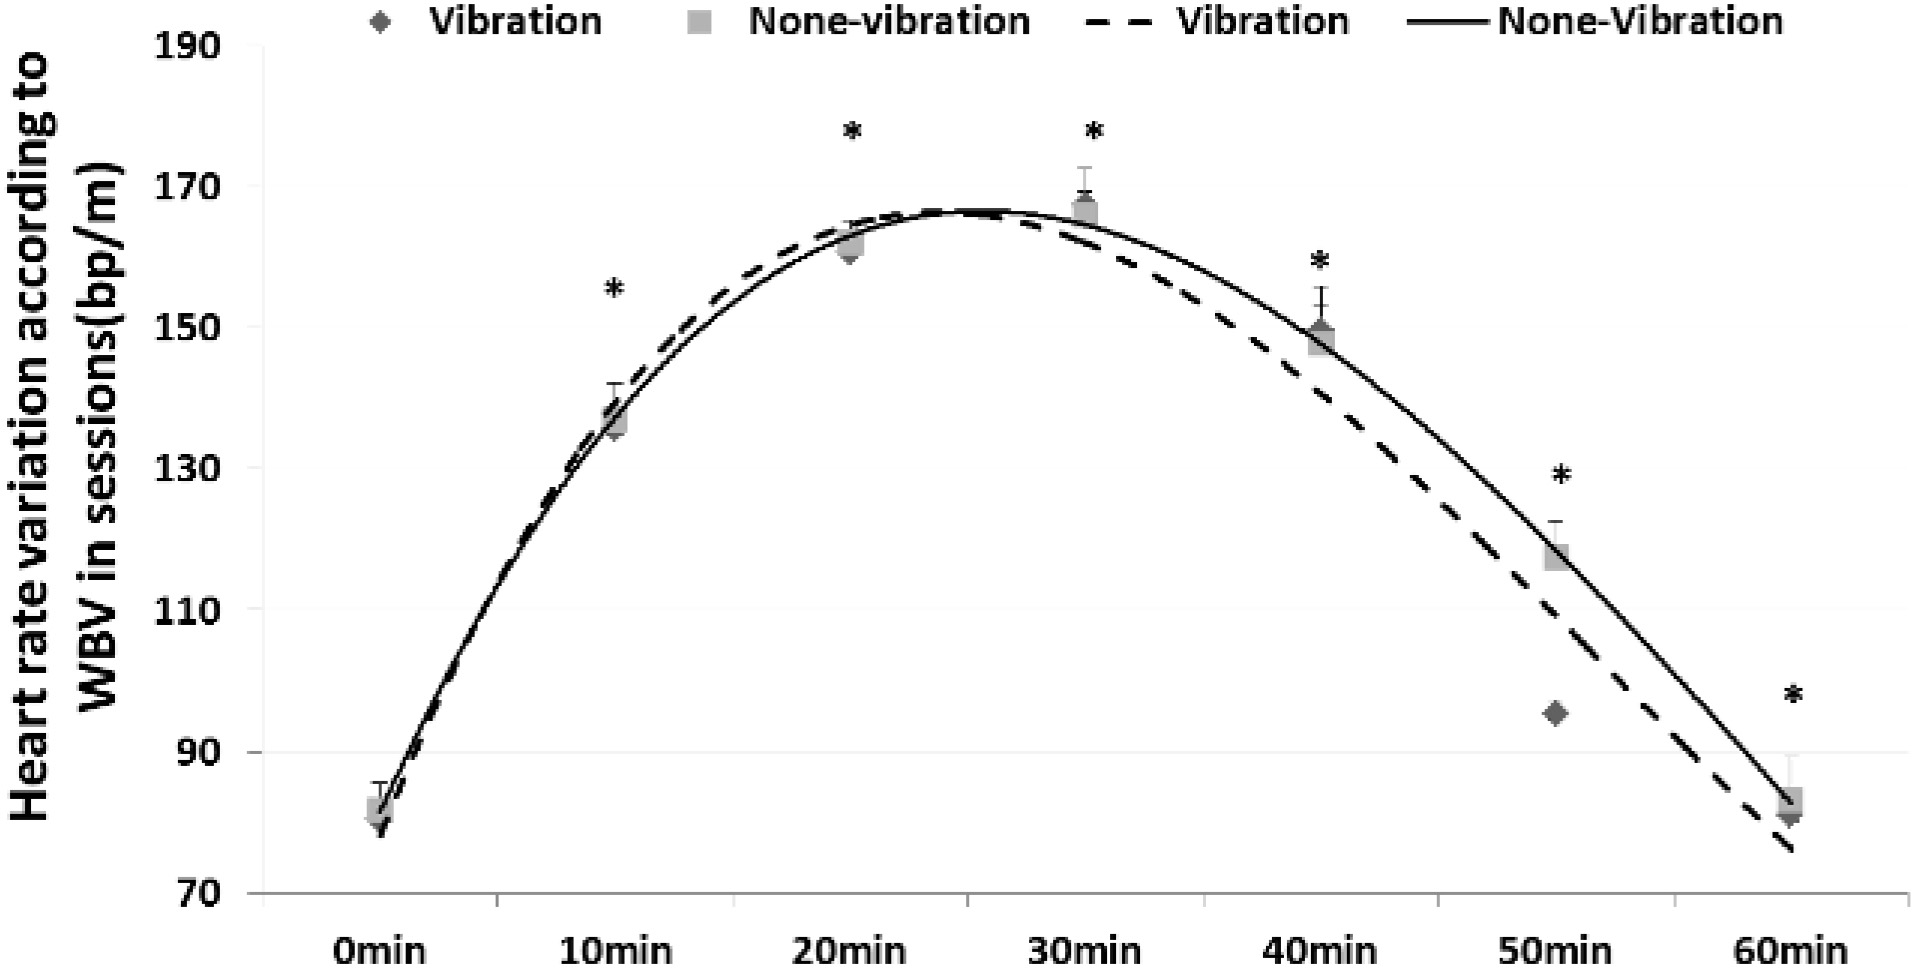 Variation in heart rate according to WBV during rest after exercise between groups (mean ± SD, *p< 0.05).